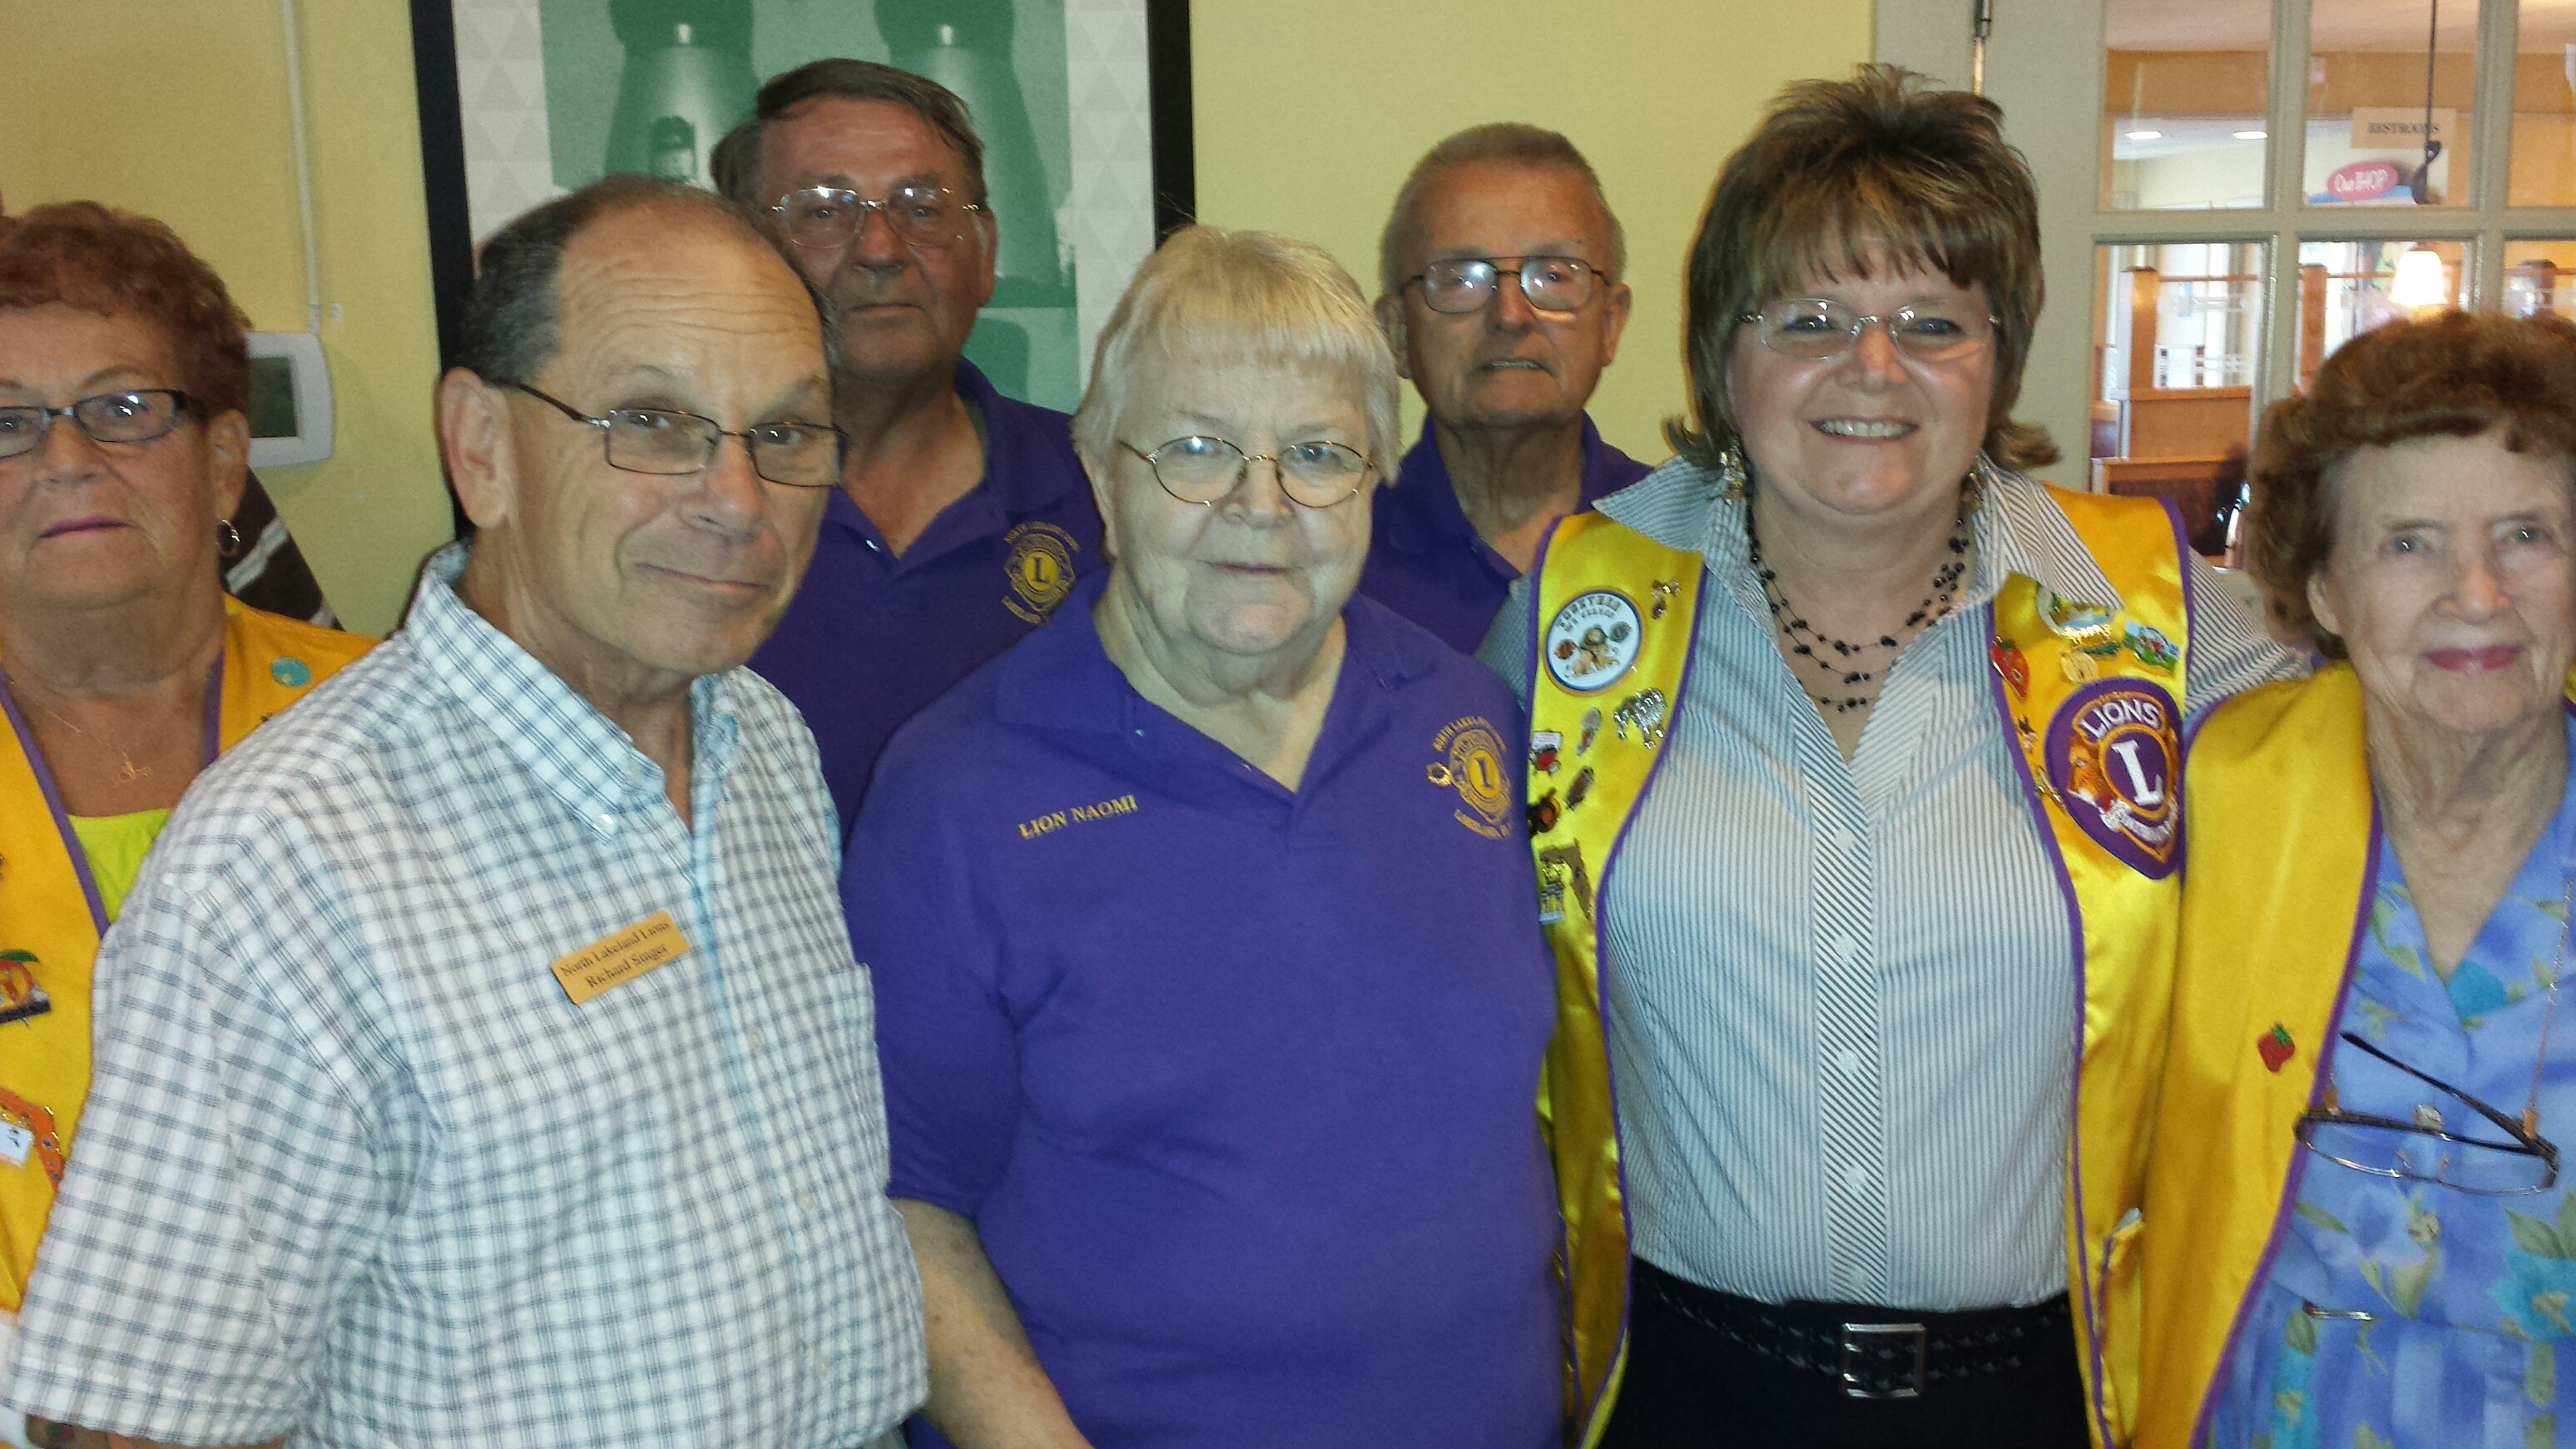 North Lakeland & Plant City Lions Pose For A Group Picture